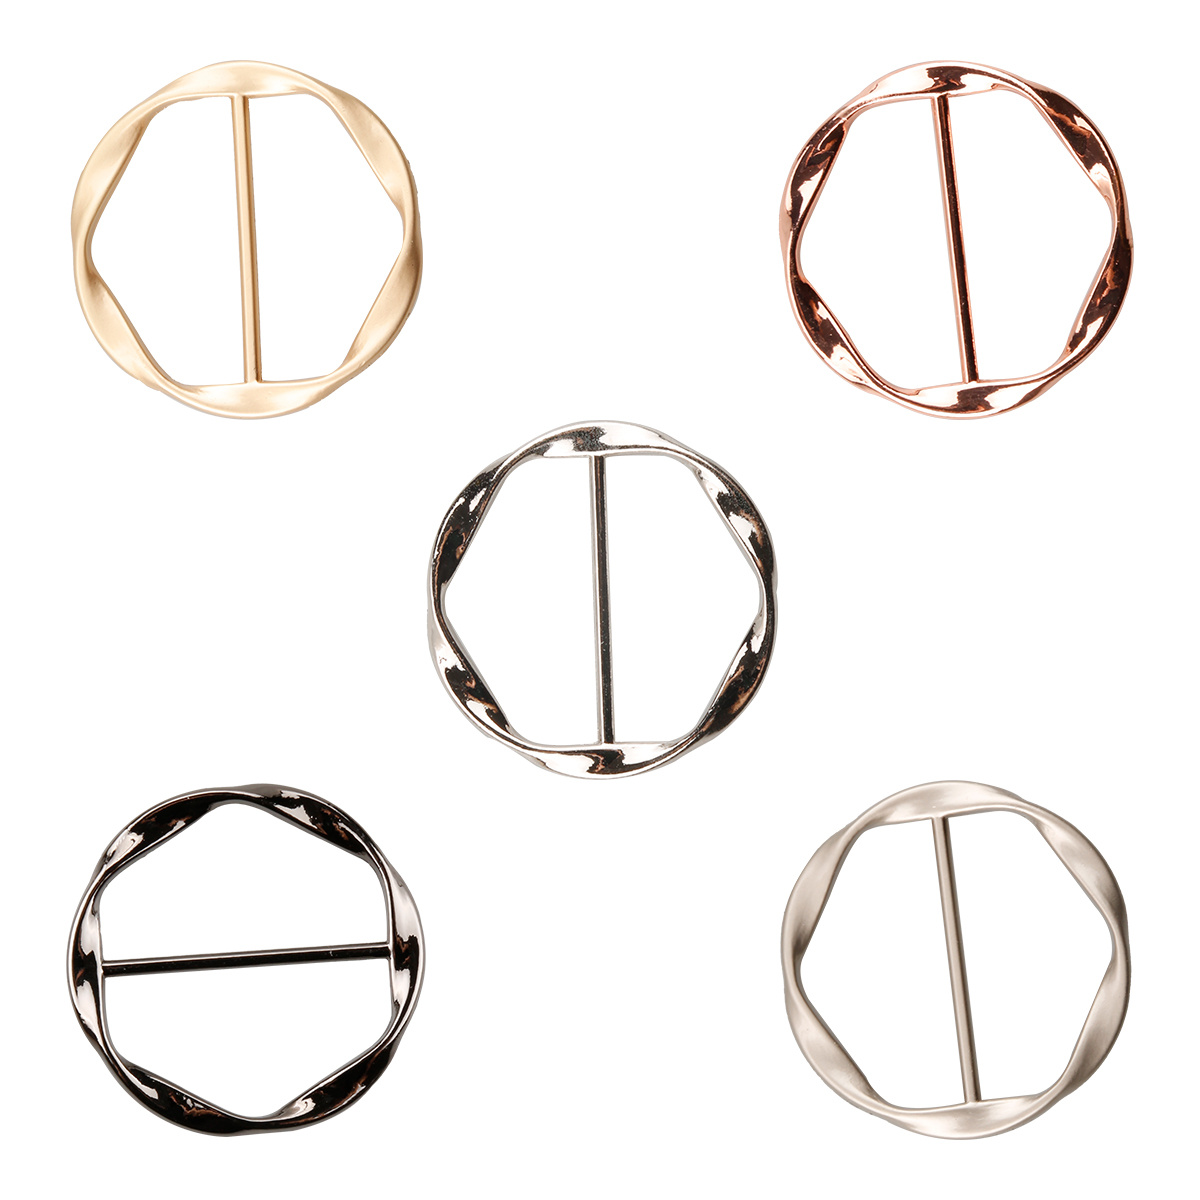  5 PCS Scarf Ring Clip T Shirt Tie Clips for Women for